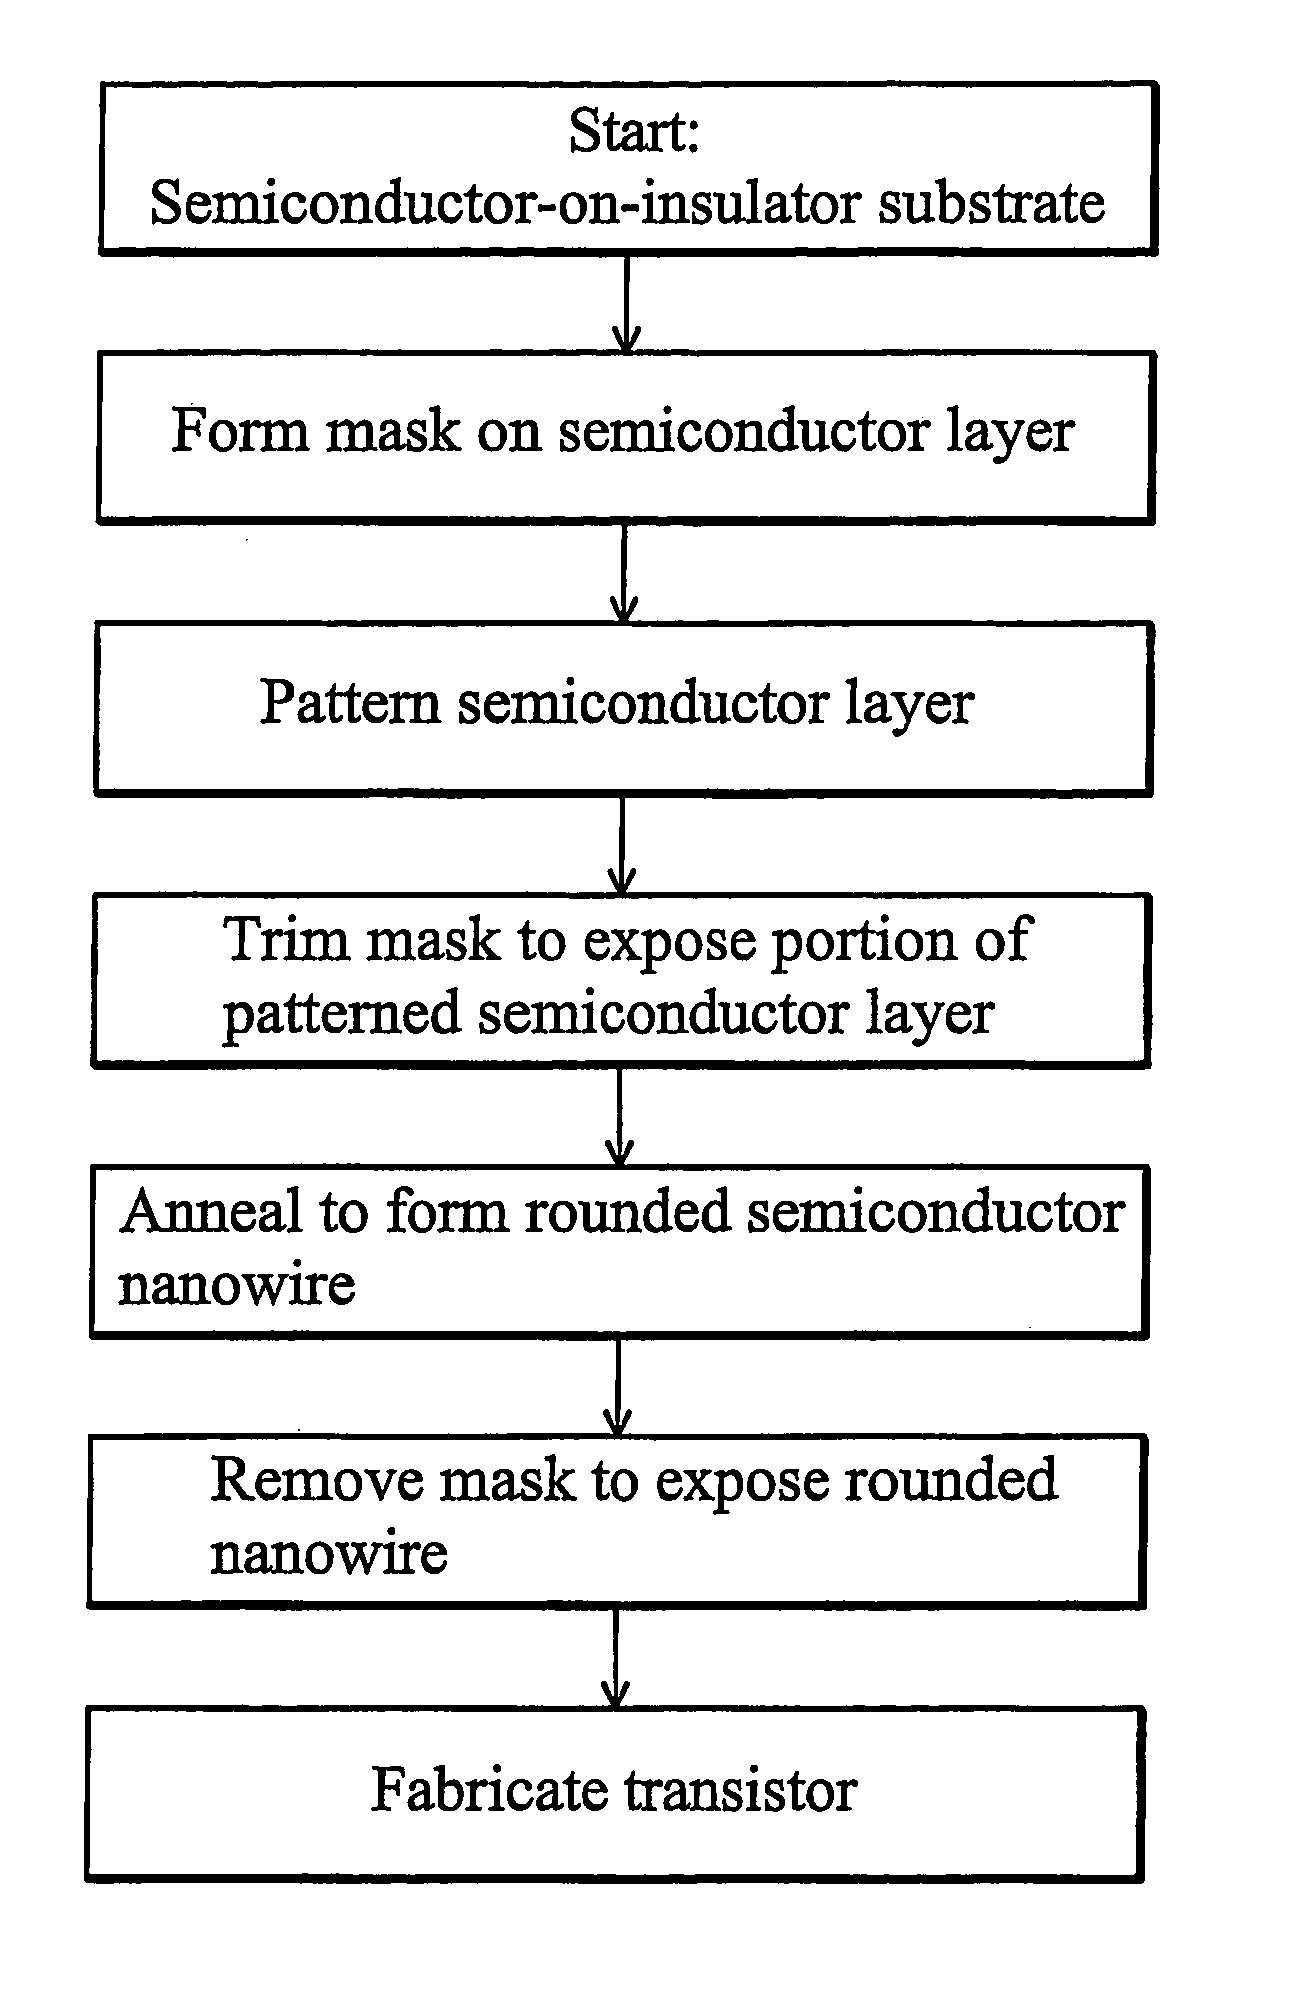 Semiconductor nano-wire devices and methods of fabrication